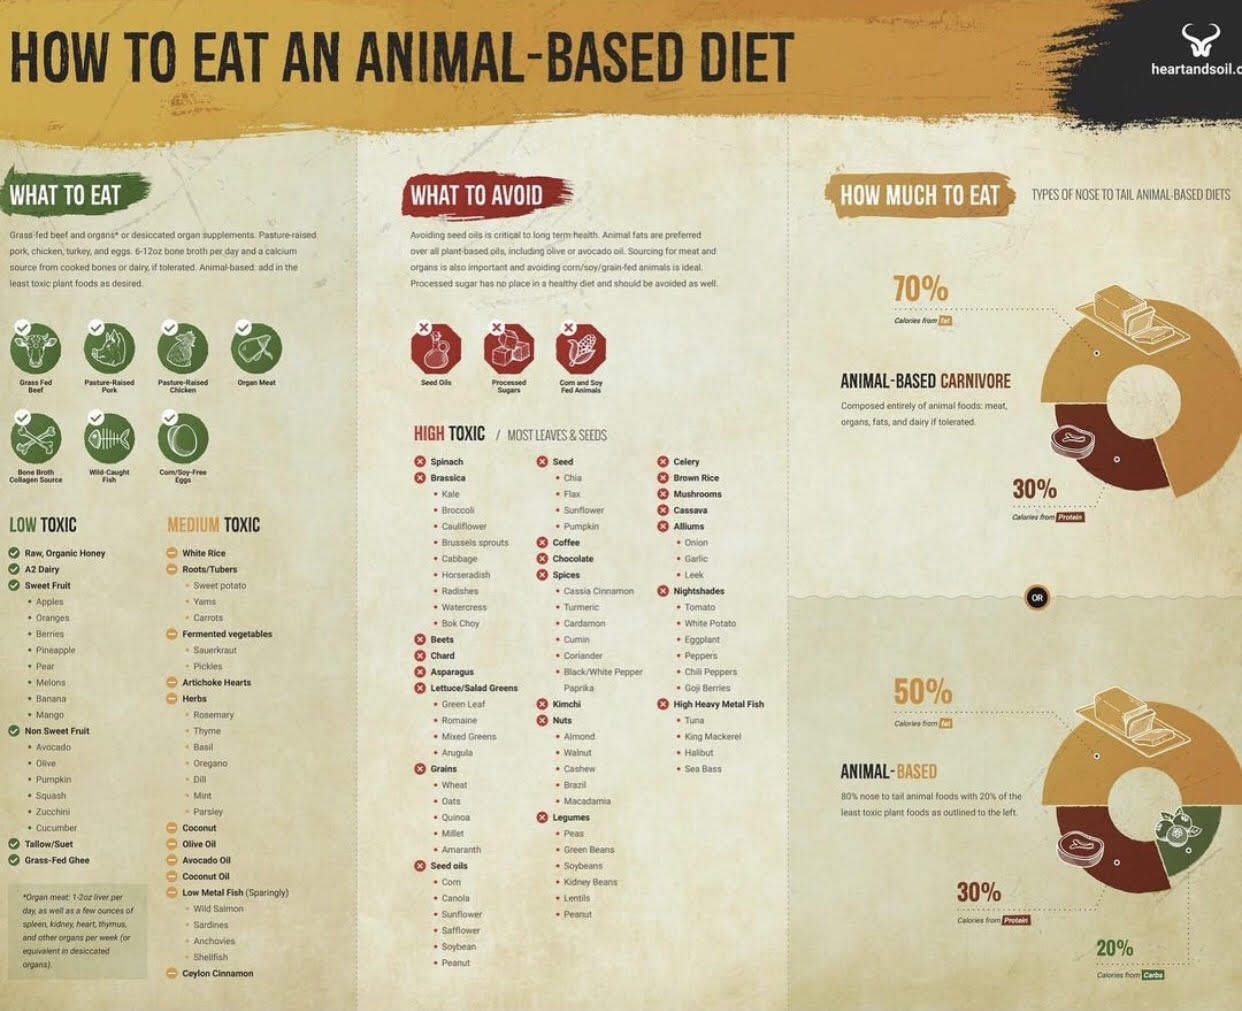 Animal-Based Diet Food List: A Simple Guide for Animal-Based Eating